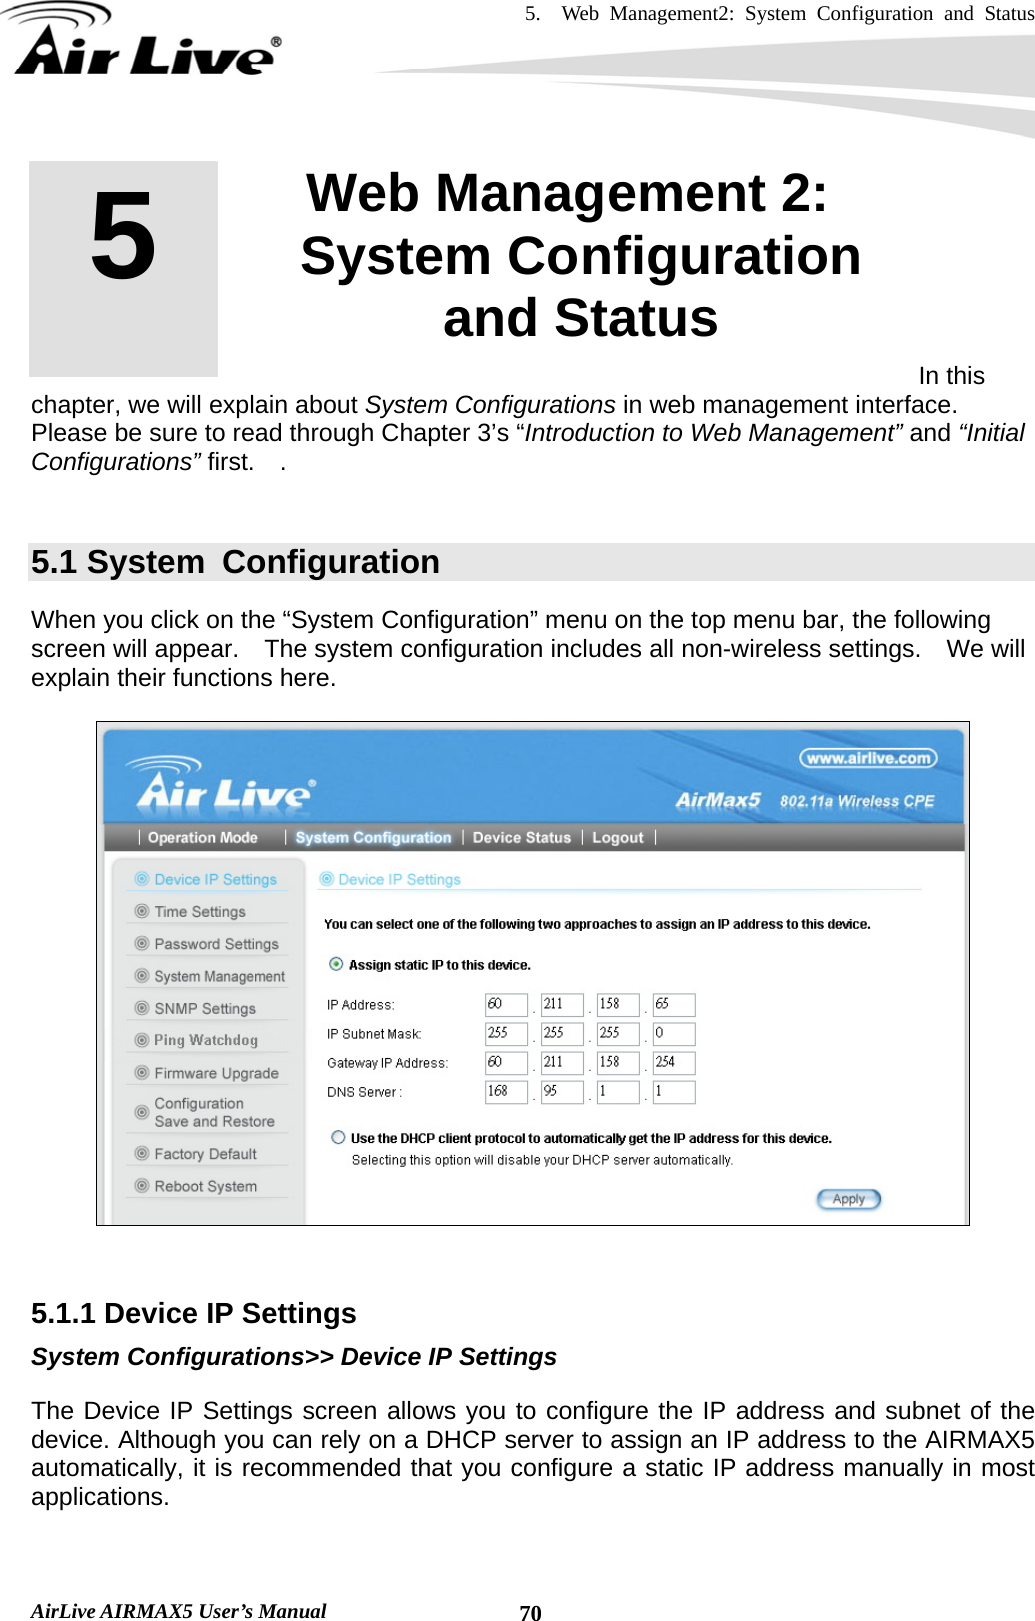 5.  Web Management2: System Configuration and Status    AirLive AIRMAX5 User’s Manual  70       In this chapter, we will explain about System Configurations in web management interface.   Please be sure to read through Chapter 3’s “Introduction to Web Management” and “Initial Configurations” first.  .   5.1 System  Configuration When you click on the “System Configuration” menu on the top menu bar, the following screen will appear.    The system configuration includes all non-wireless settings.    We will explain their functions here.     5.1.1 Device IP Settings System Configurations&gt;&gt; Device IP Settings The Device IP Settings screen allows you to configure the IP address and subnet of the device. Although you can rely on a DHCP server to assign an IP address to the AIRMAX5 automatically, it is recommended that you configure a static IP address manually in most applications.   5  5. Web Management 2: System Configuration and Status  